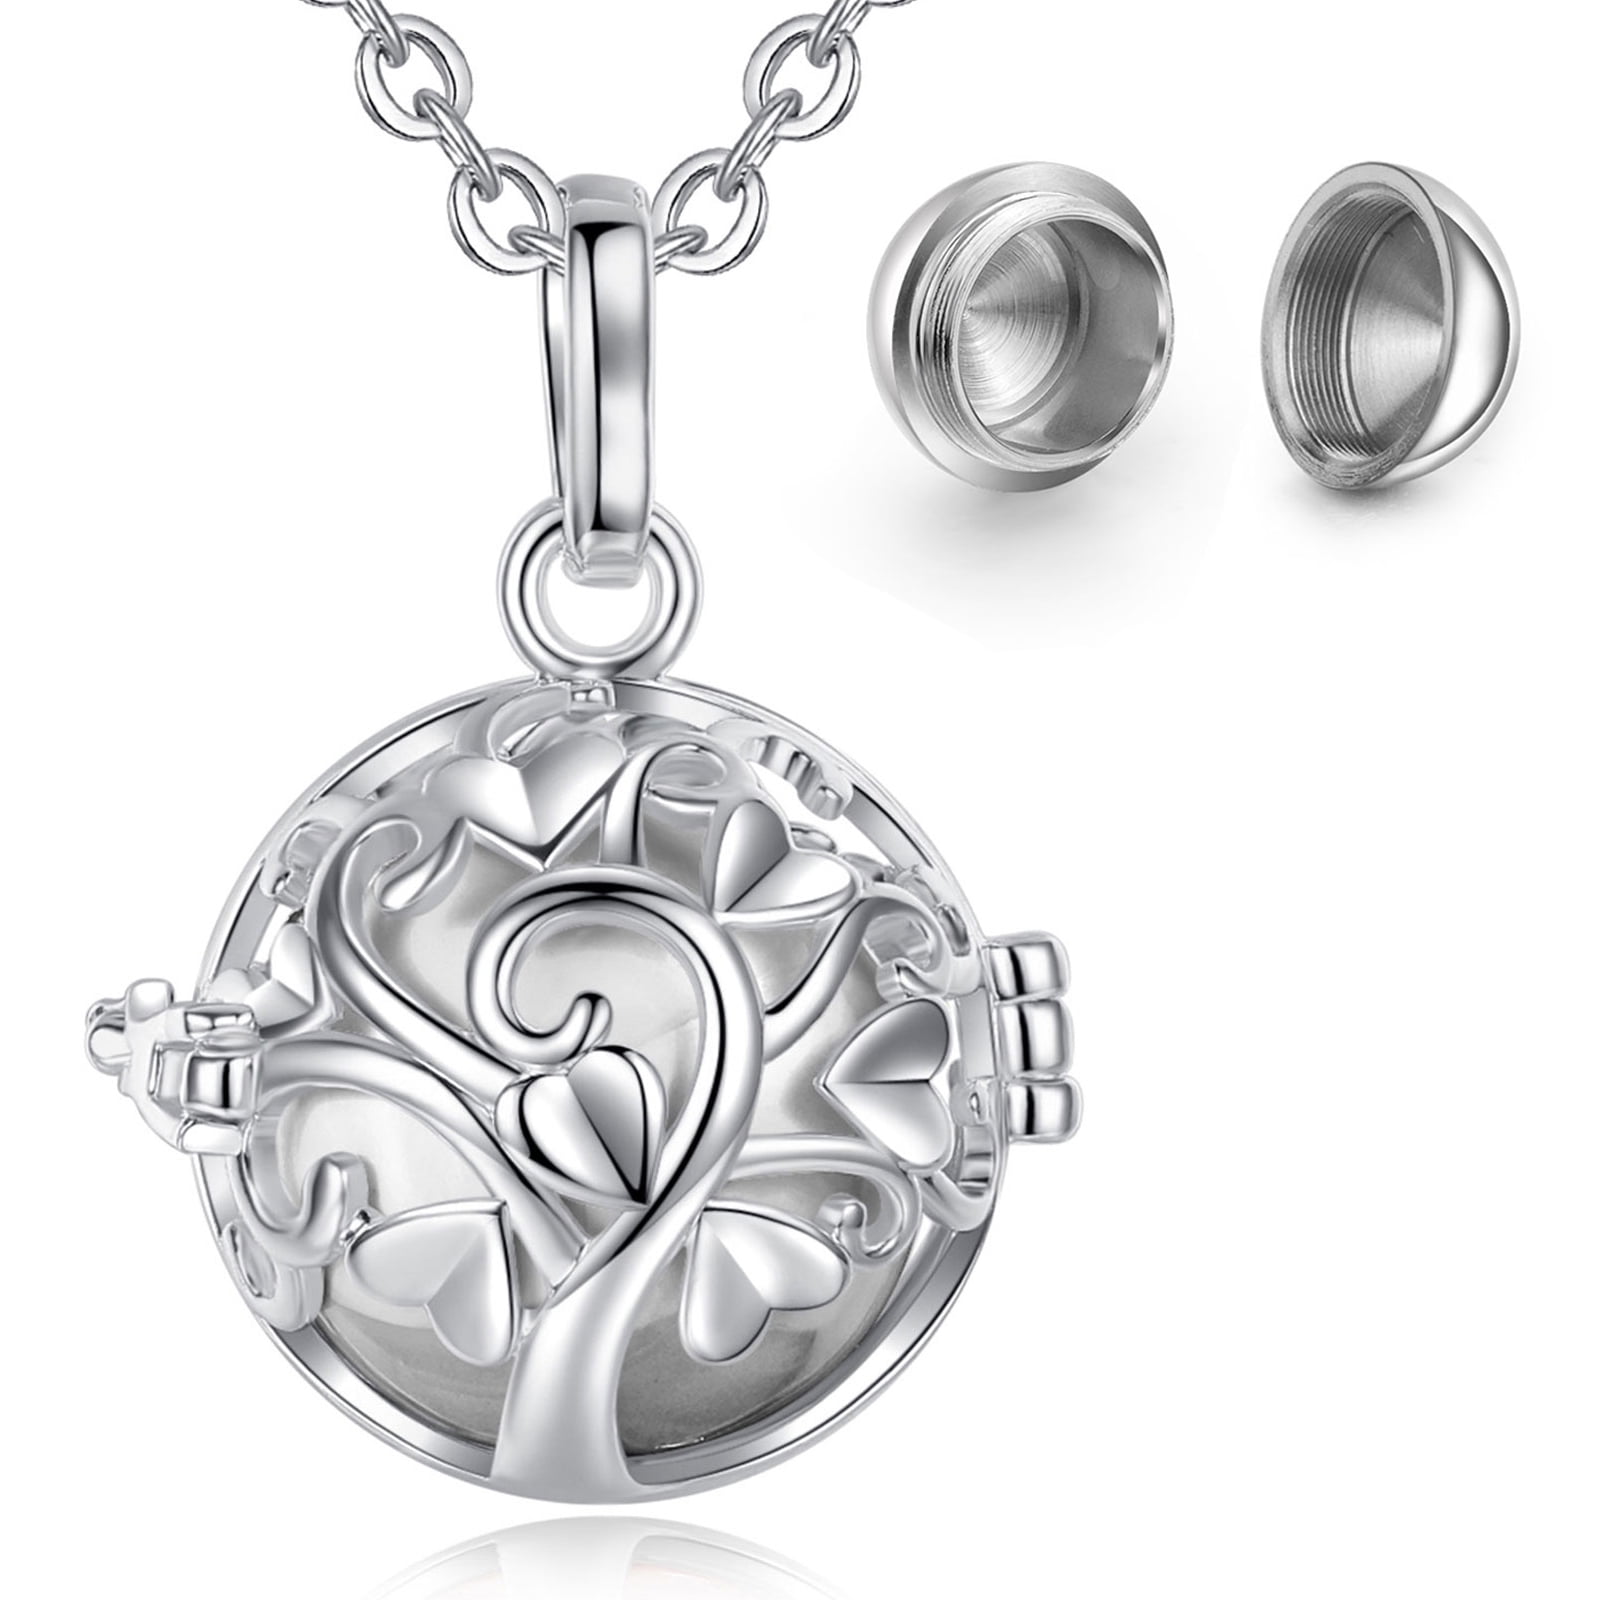 Homxi Urn Pendant Necklace,Dog and Dog Paw Print with Round Engraving  Golden Retriever Urn Necklaces for Ashes Stainless Steel Silver Pendant for  Ashes : Amazon.co.uk: Pet Supplies